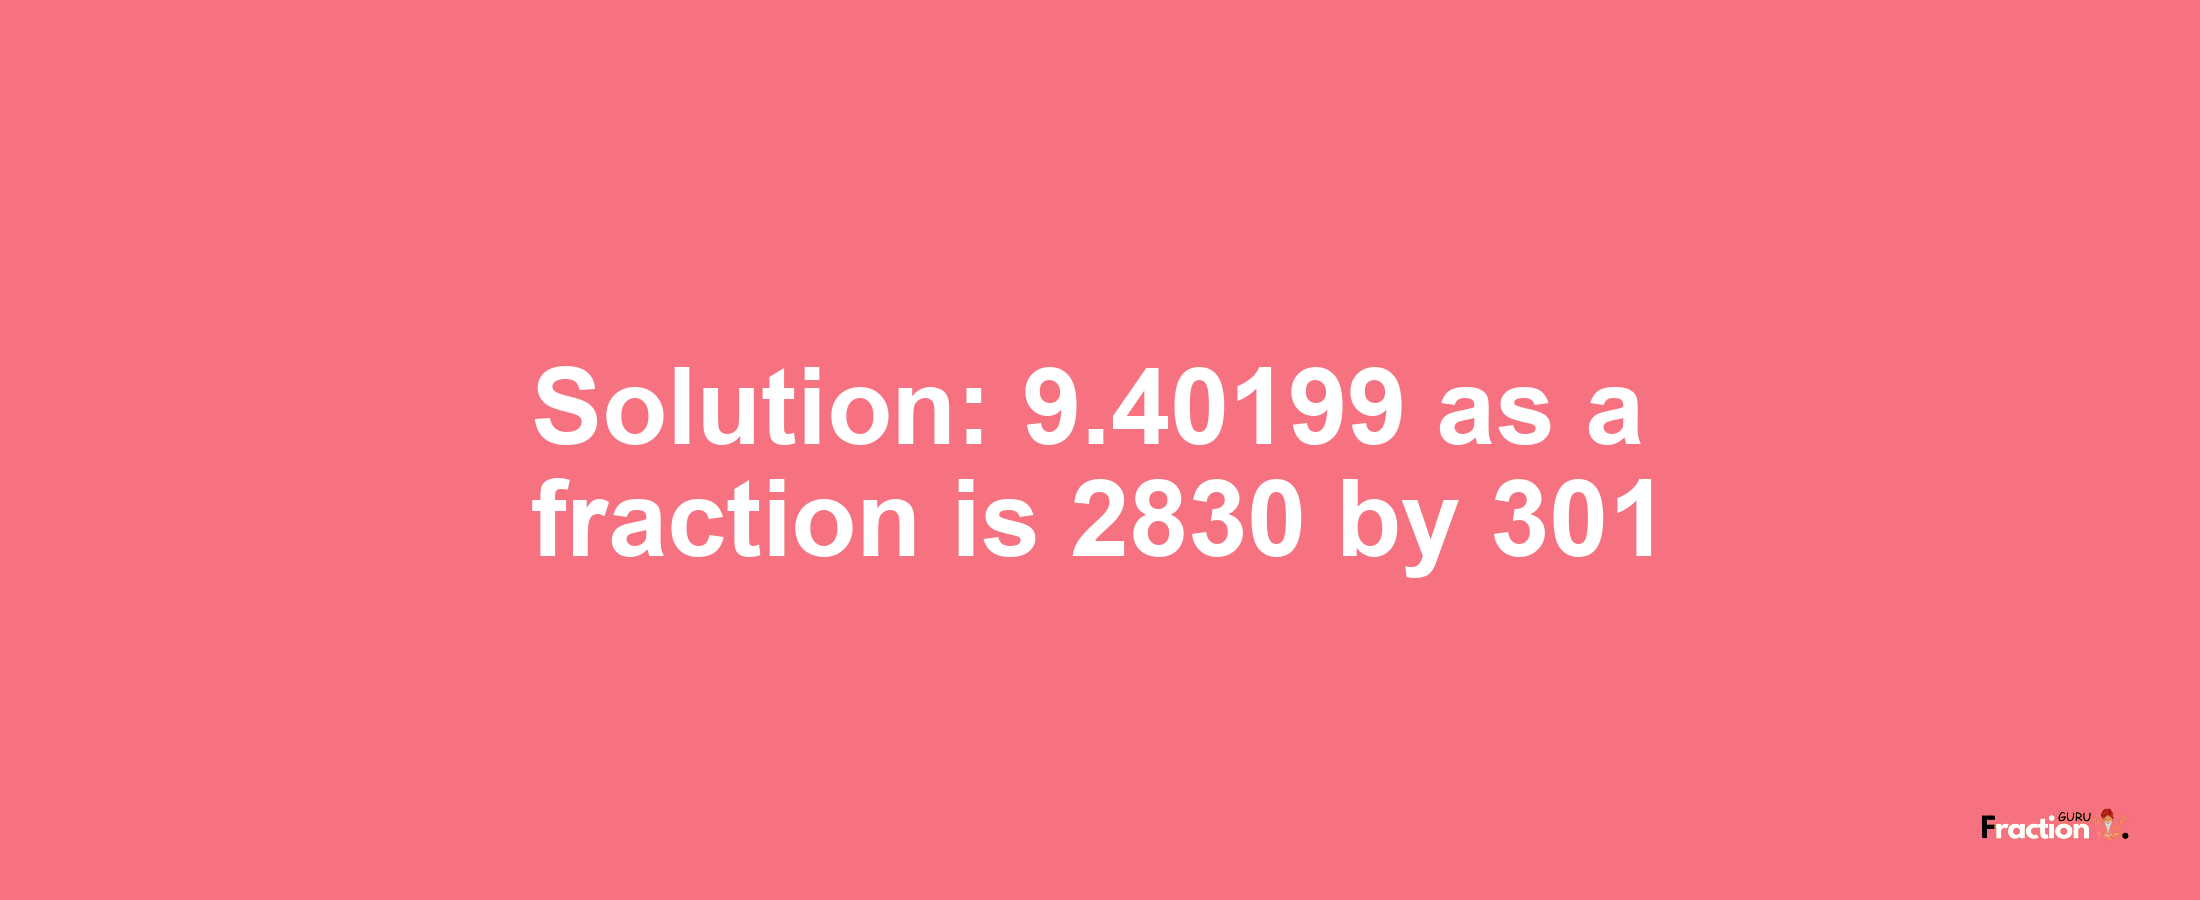 Solution:9.40199 as a fraction is 2830/301